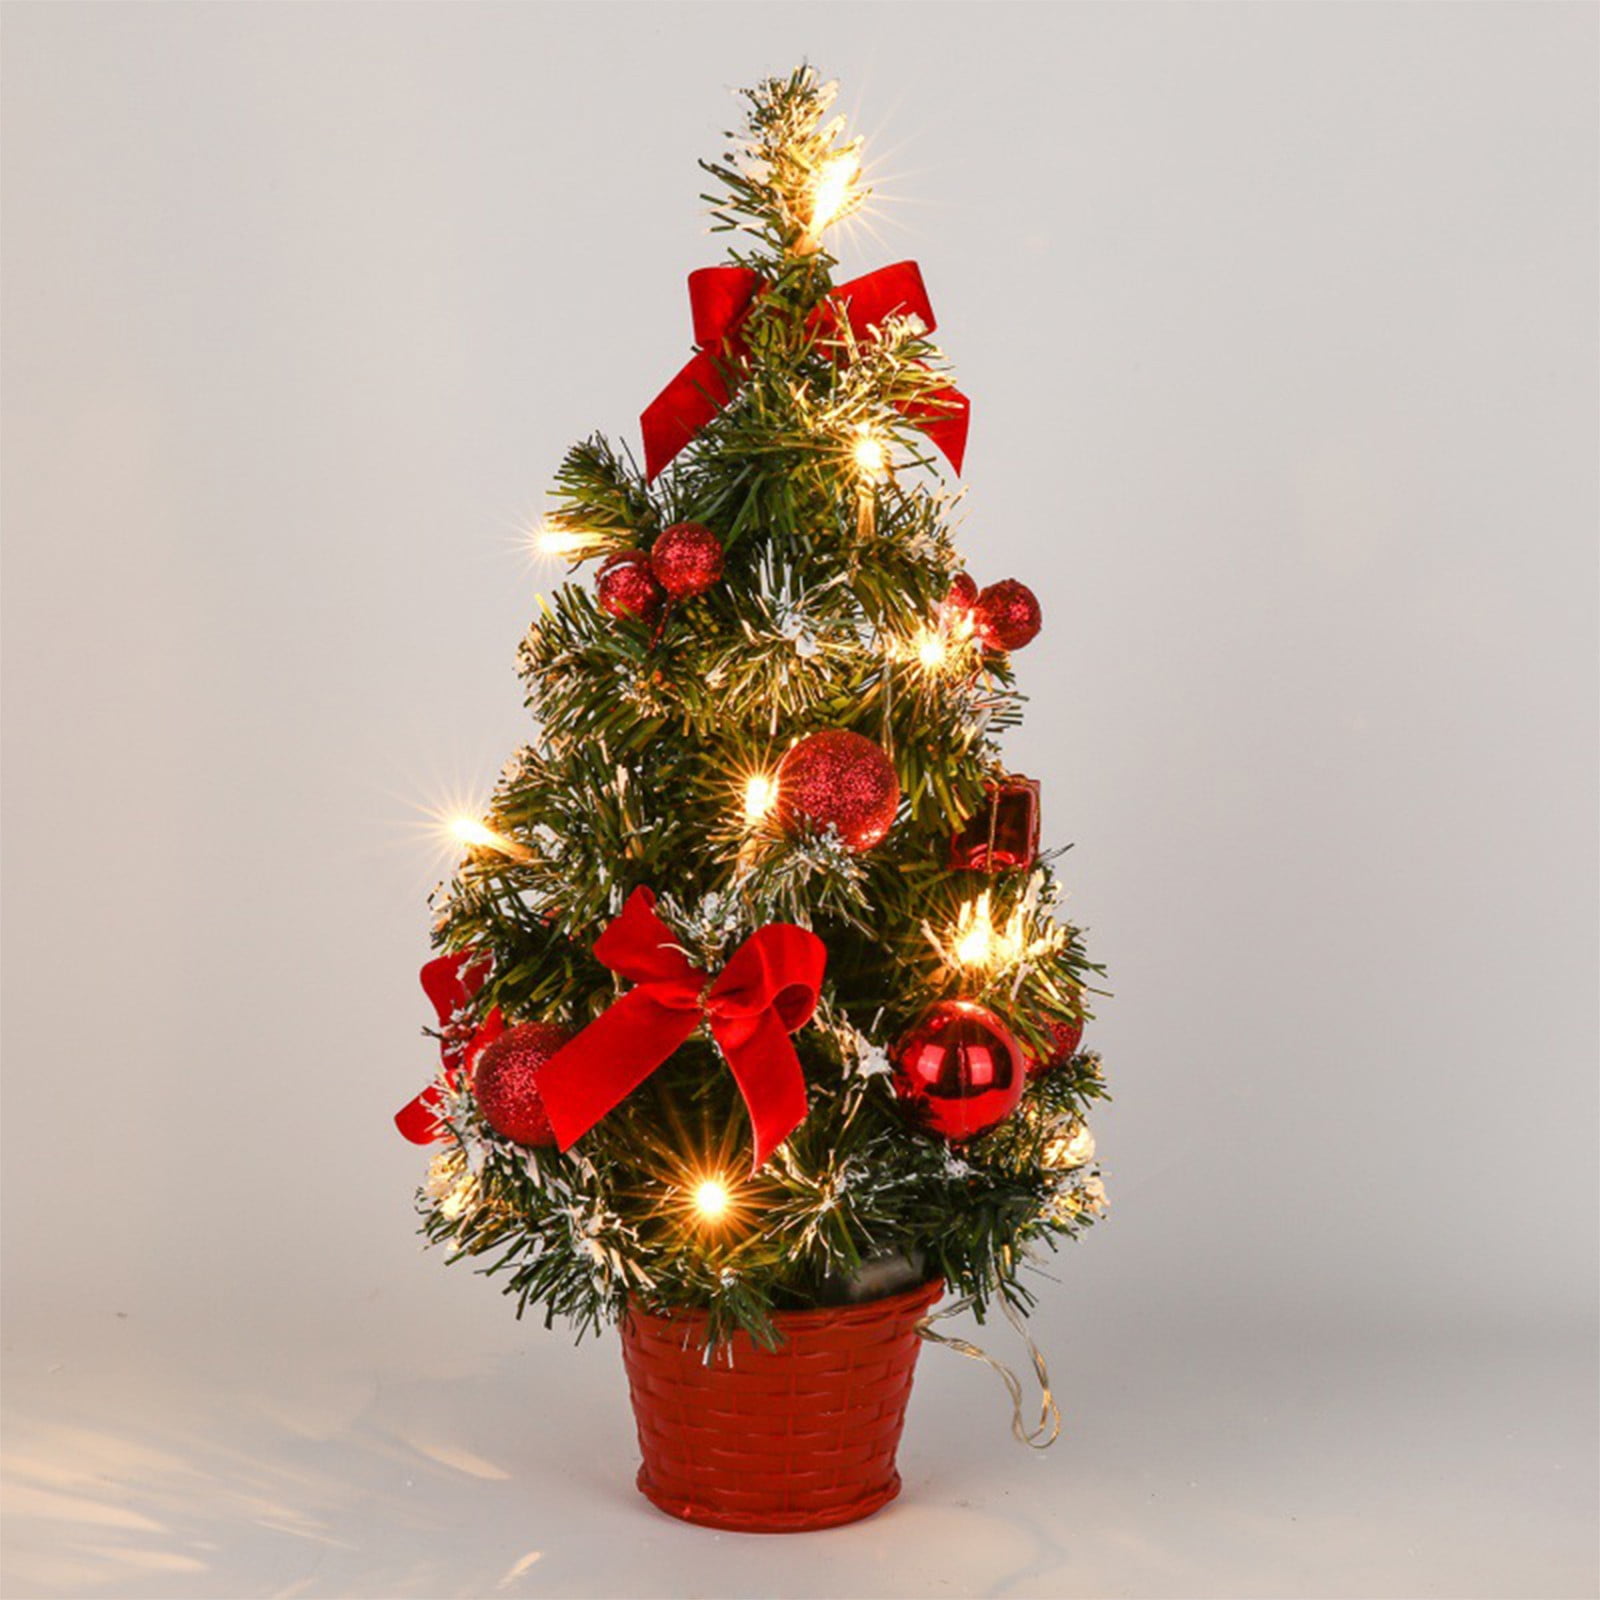 Wall Christmas Tress 16 Decorative Indoor Light Up with Timer - Set o —  SkyMall